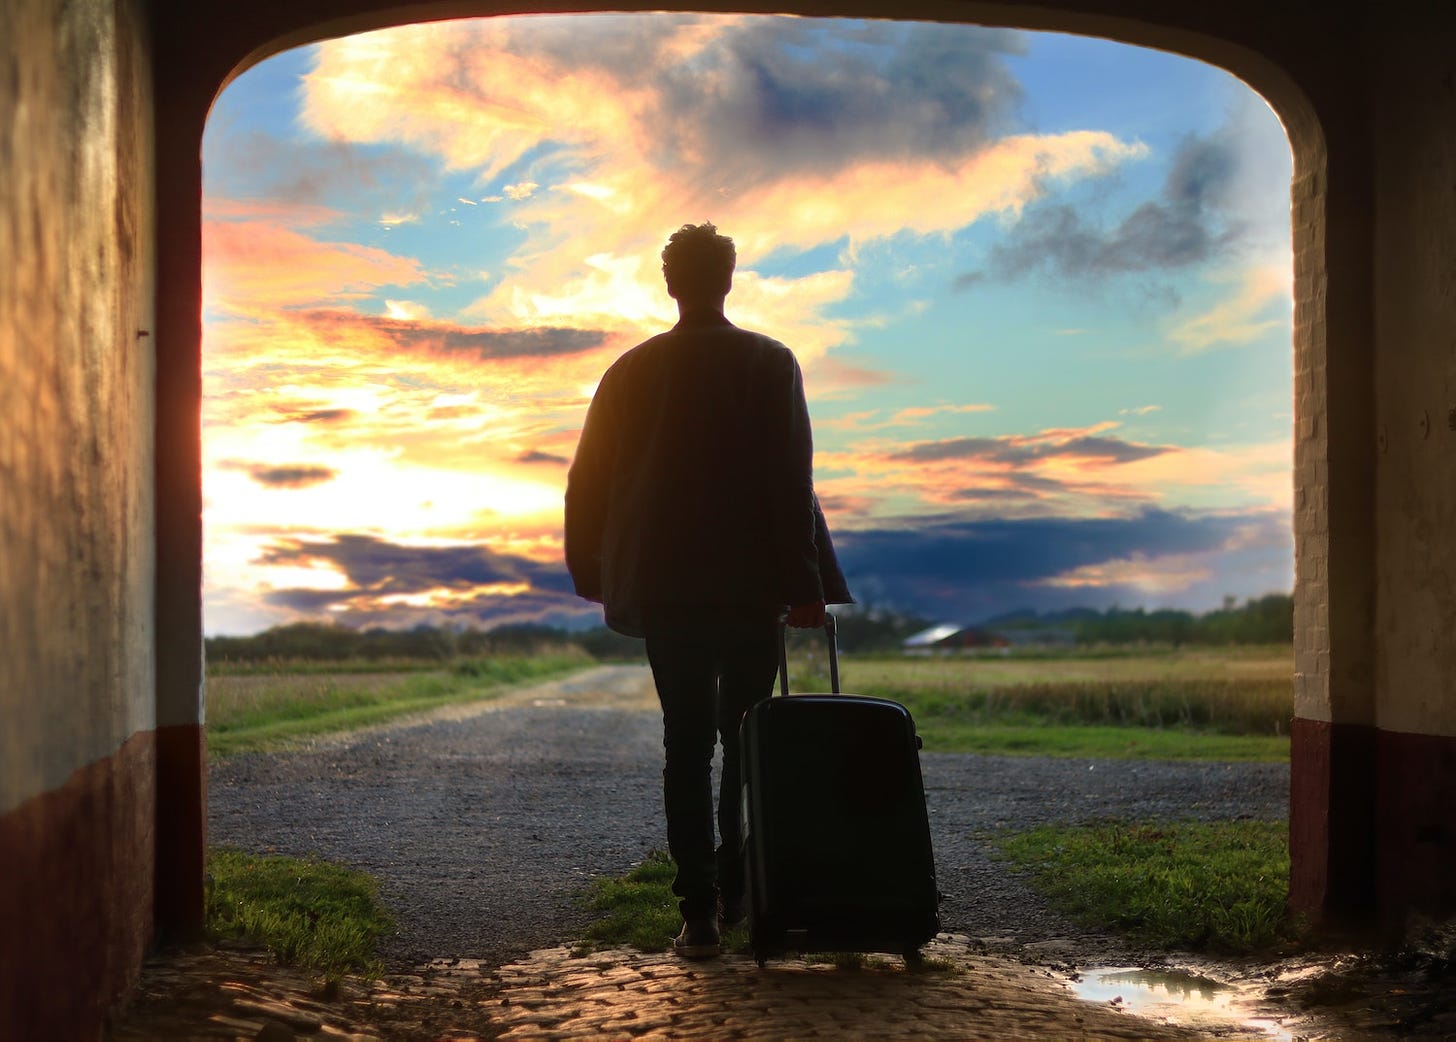 A man walks away from the camera into a sunset, wheeling a suitcase 